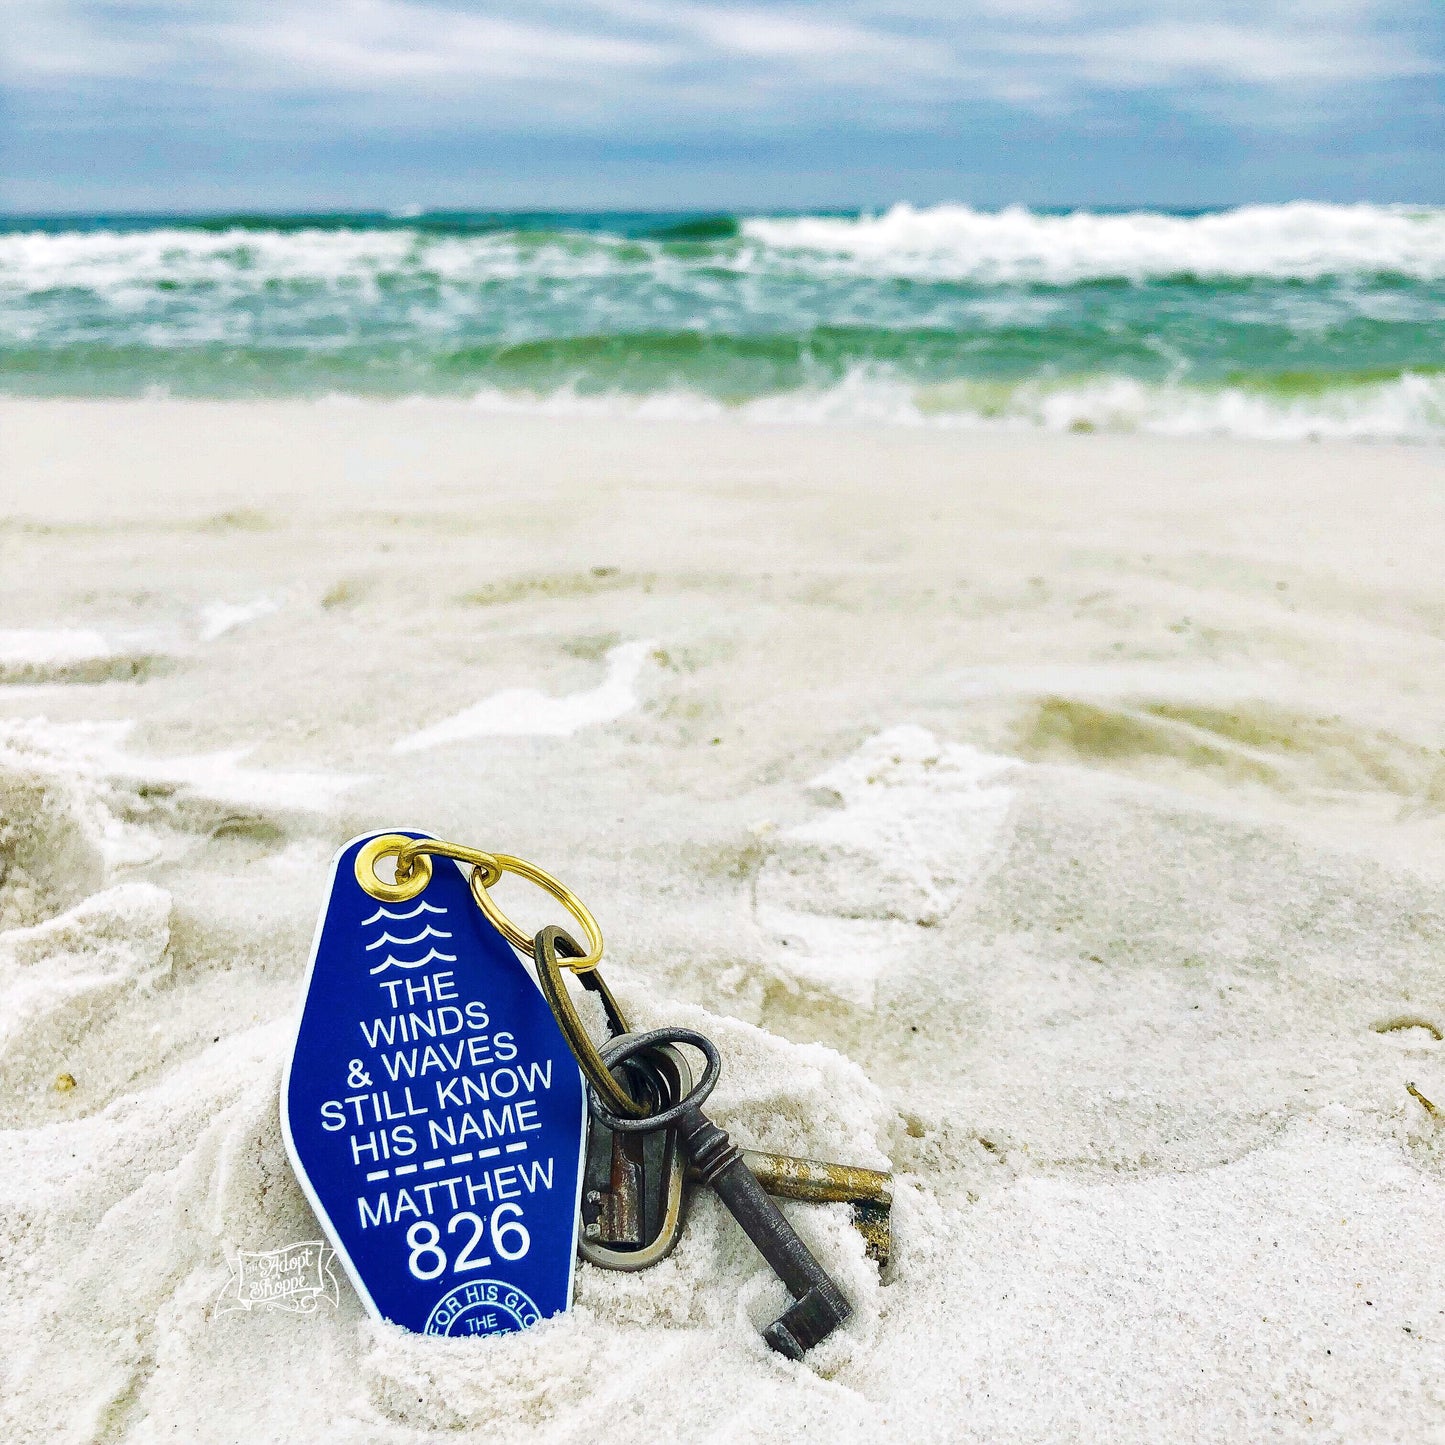 the winds and waves still know His name blue retro motel key tag fob